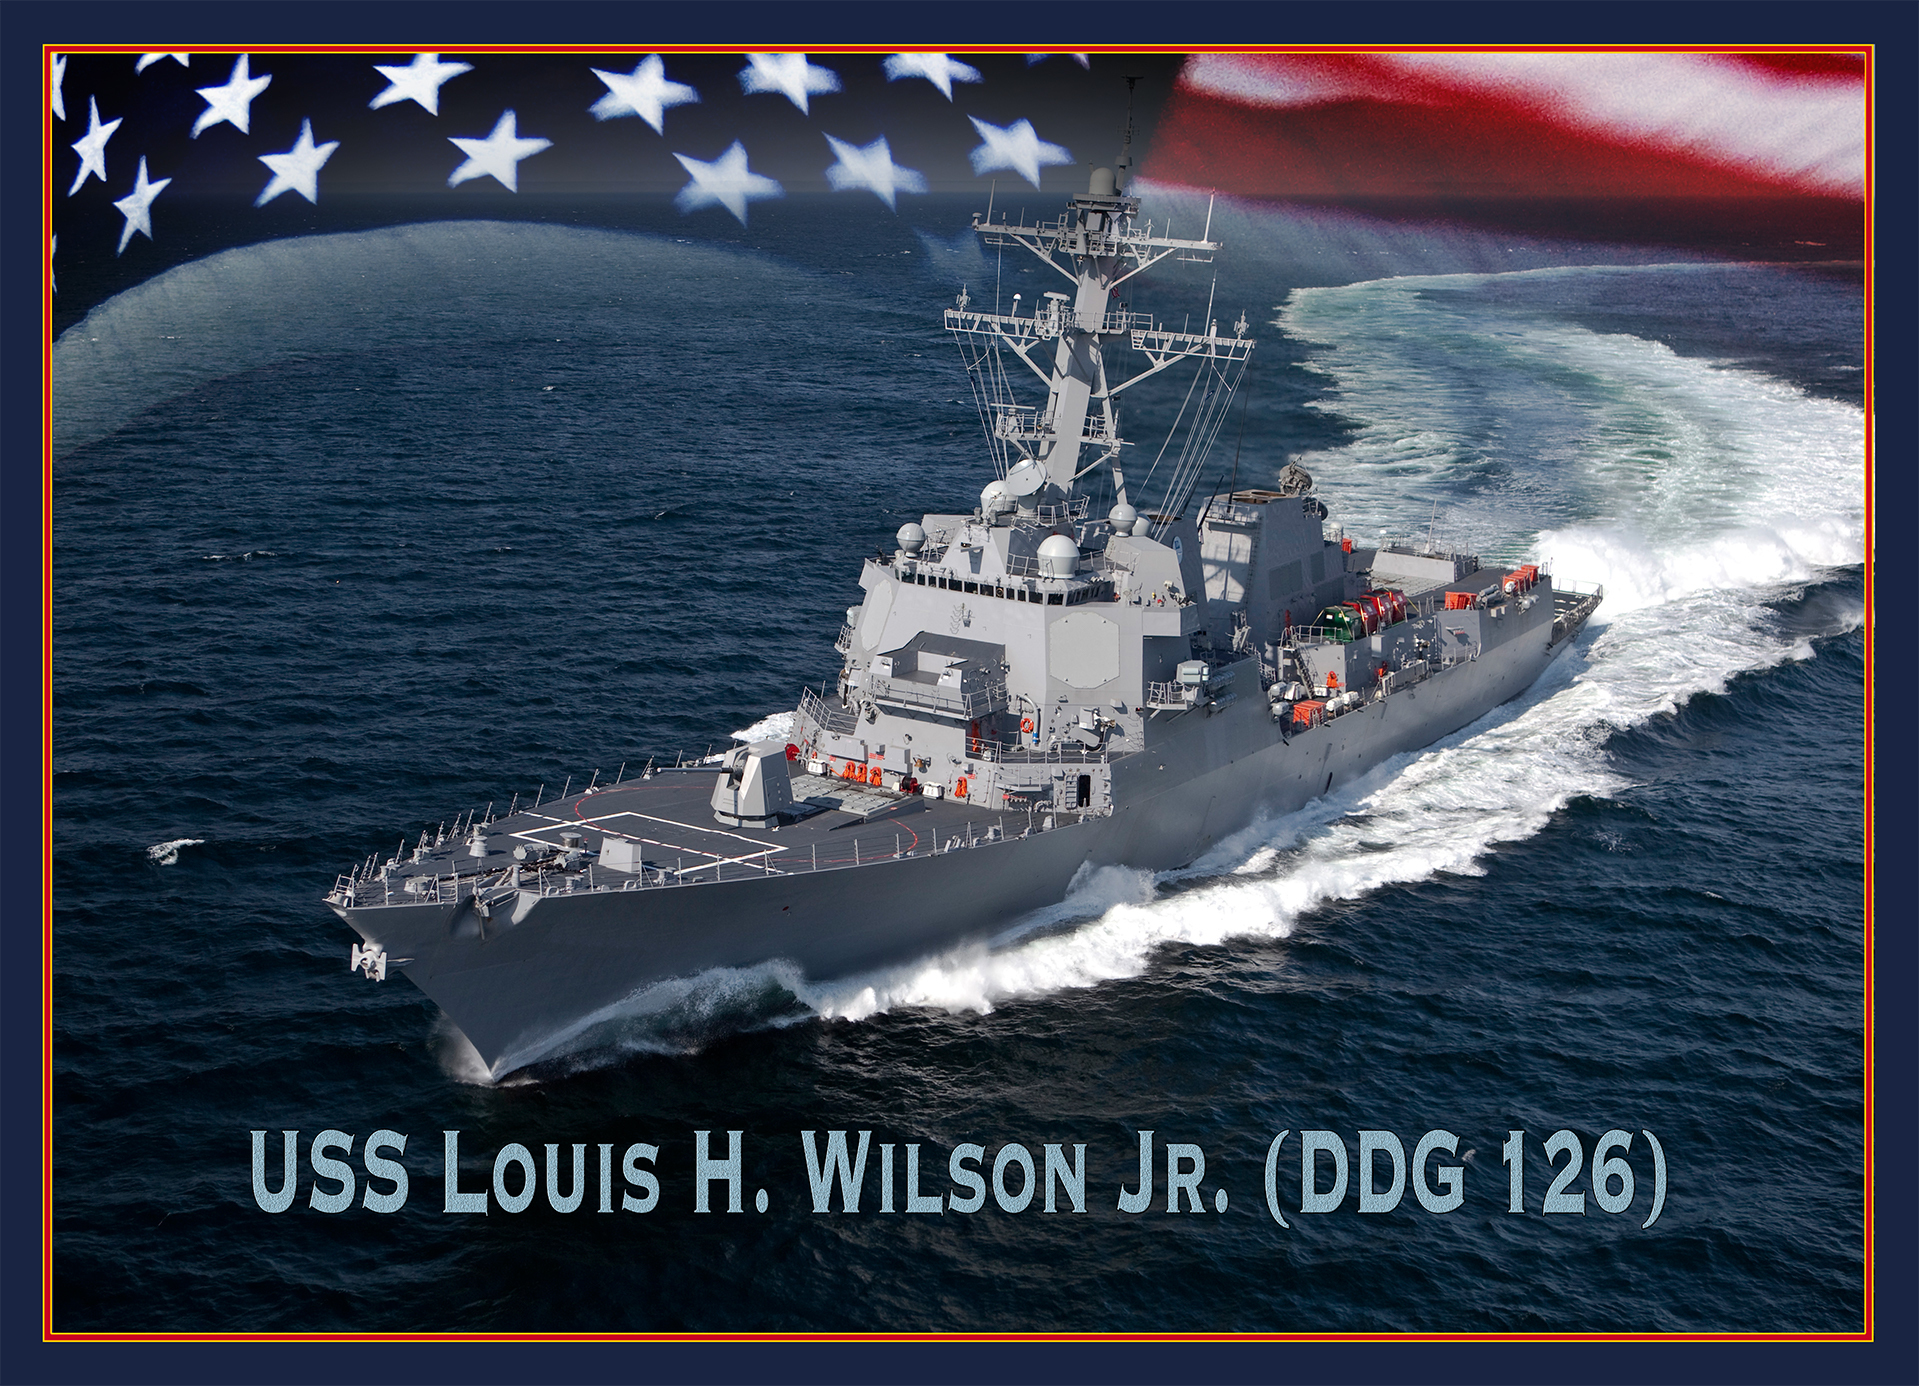 160830-N-LV331-004WASHINGTON (Aug. 30, 2016) A graphic representation of the future USS Louis H. Wilson Jr. (DDG 126). (U.S. Navy photo by Mass Communication Specialist 1st Class Armando Gonzales/Released)